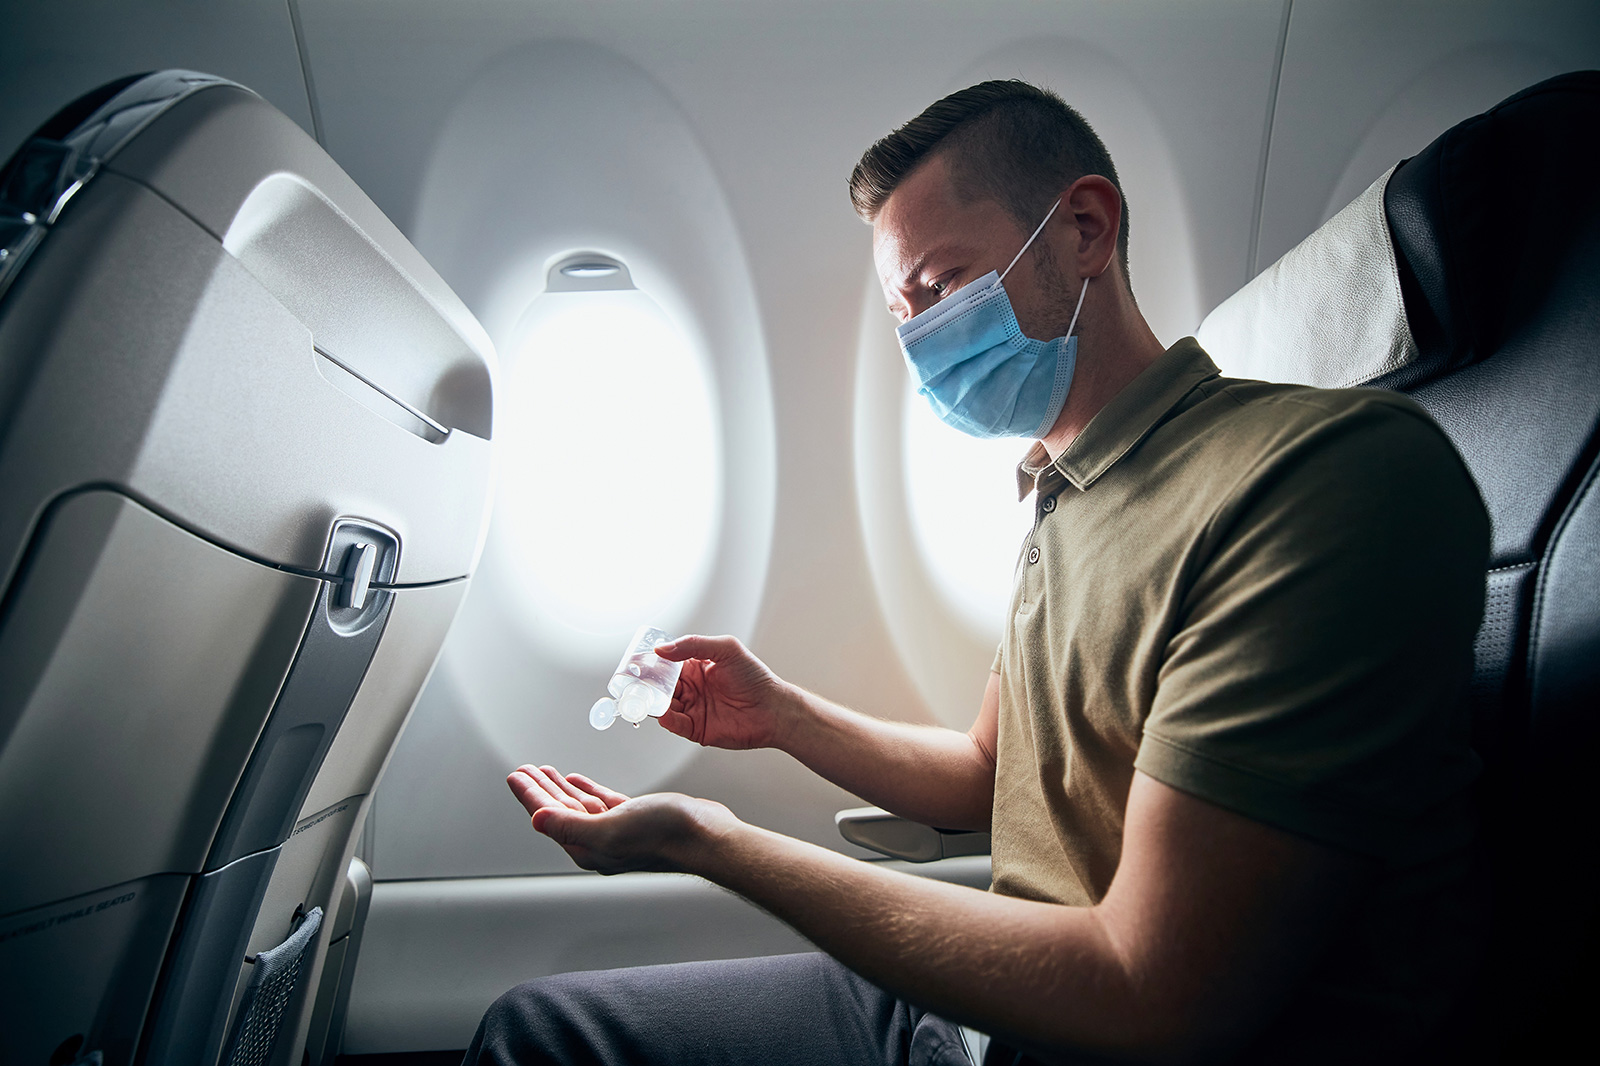 How to Avoid Illness When Traveling